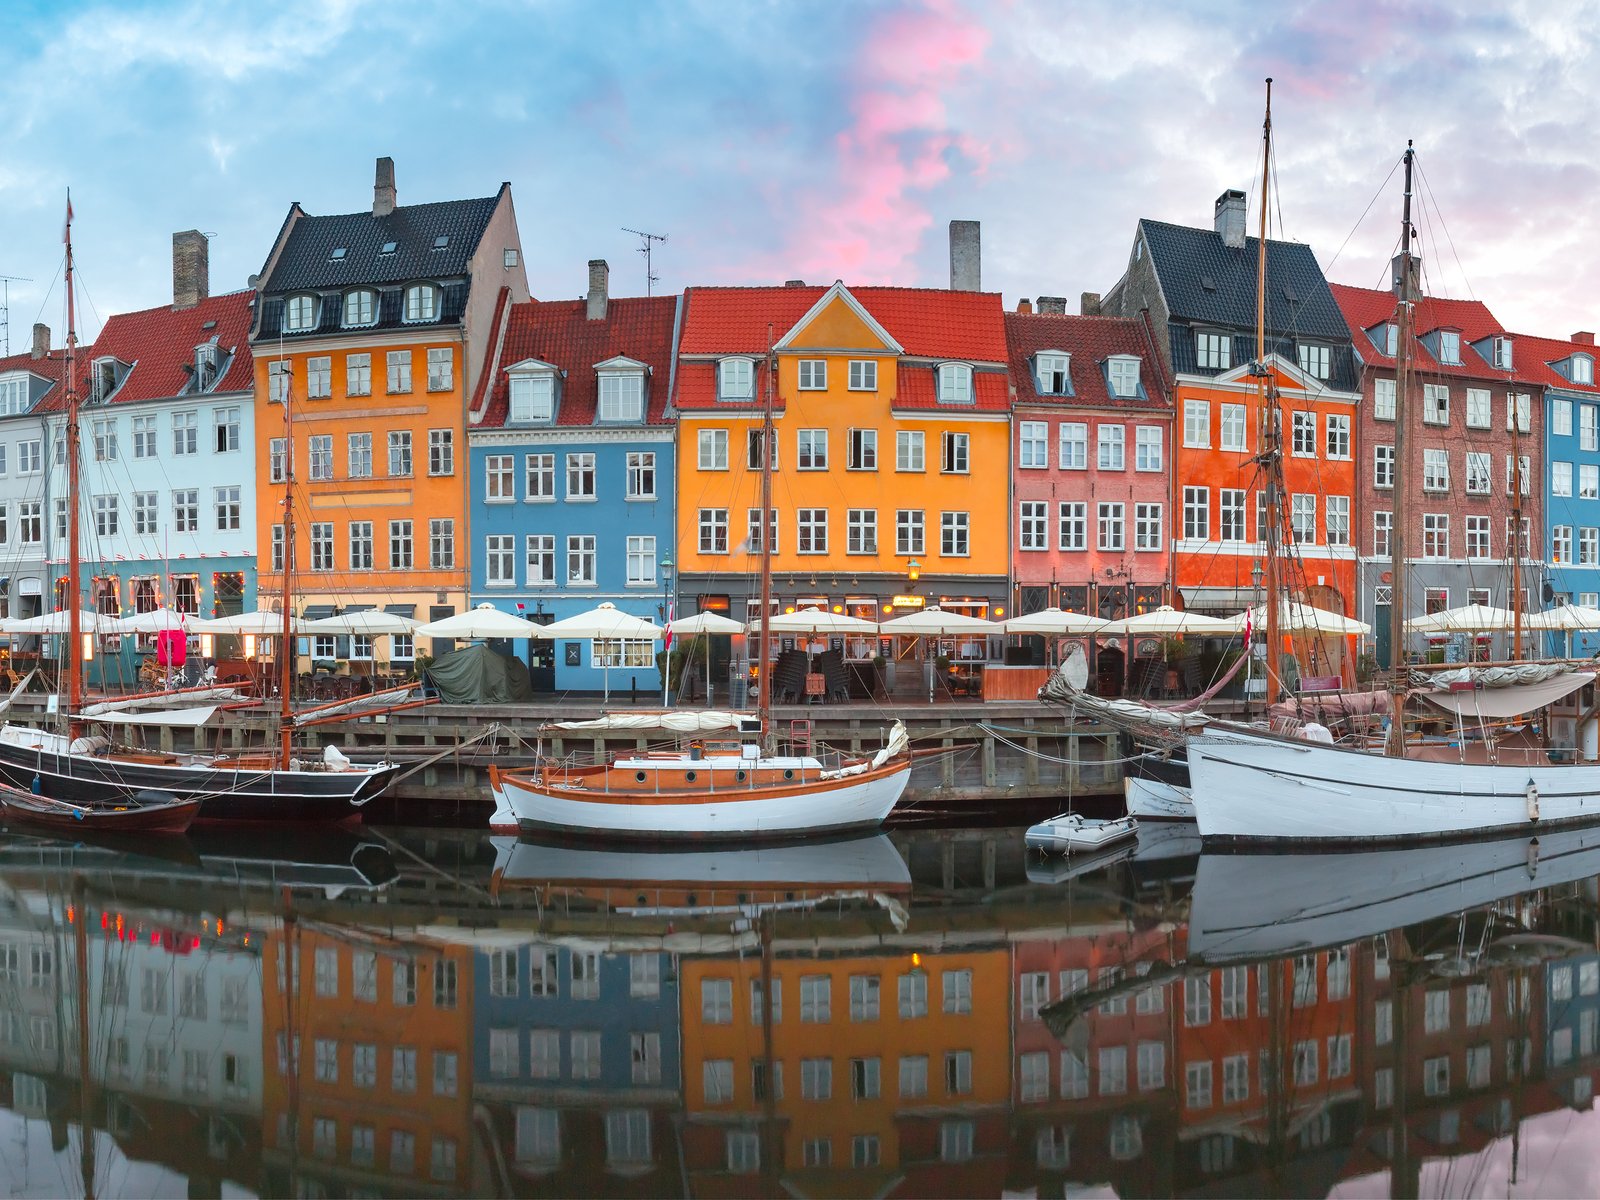 The old town of Copenhagen, which has just taken the top slot in the Safest Cities Index.

